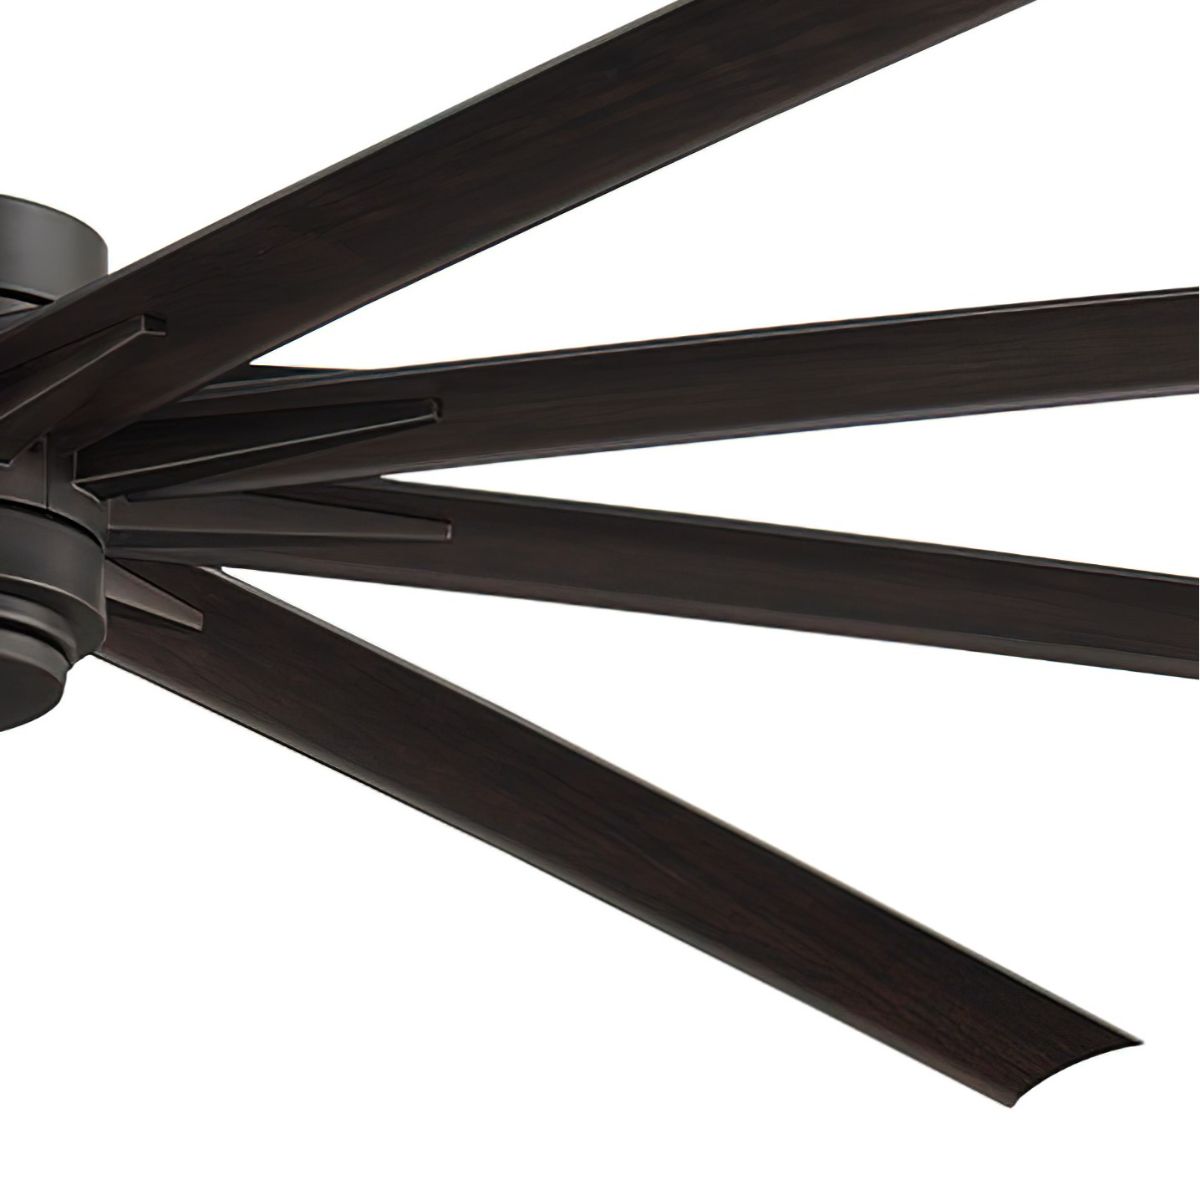 Odyn 84 Inch Windmill Outdoor Ceiling Fan With Light And Remote, 9 Blades, DC Motor